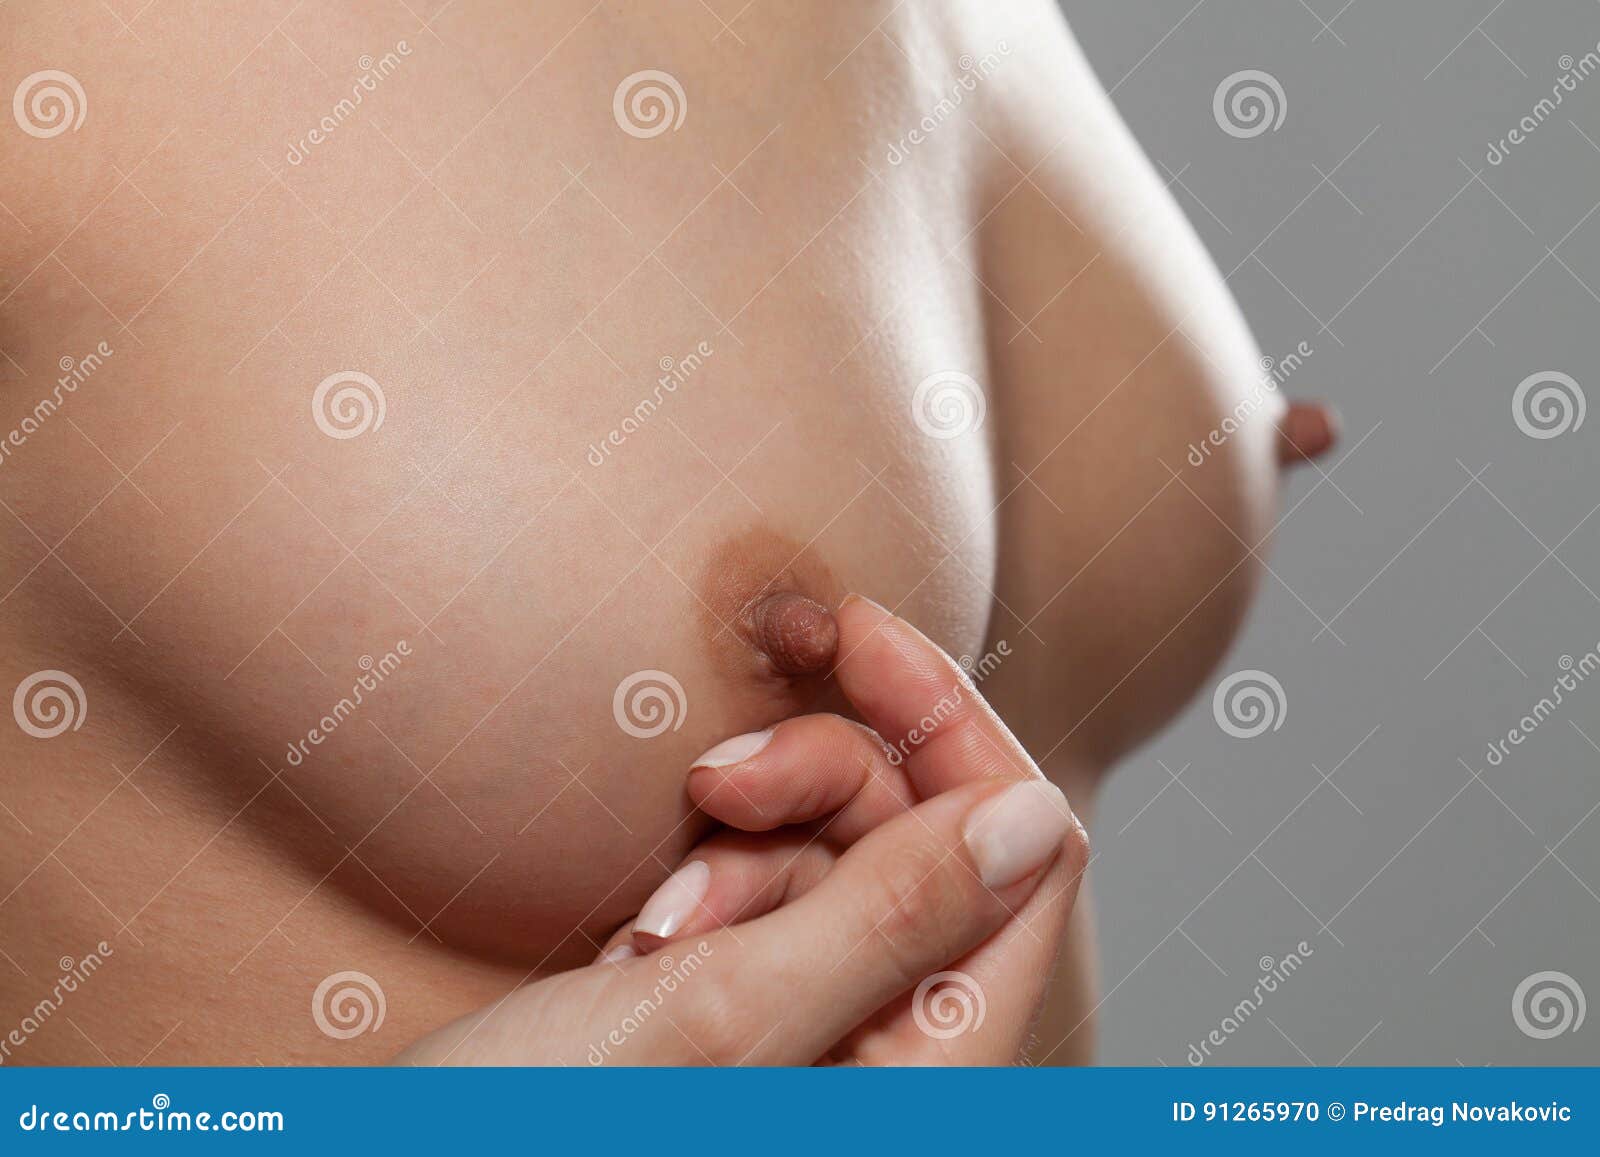 andy normand add large nipple images photo